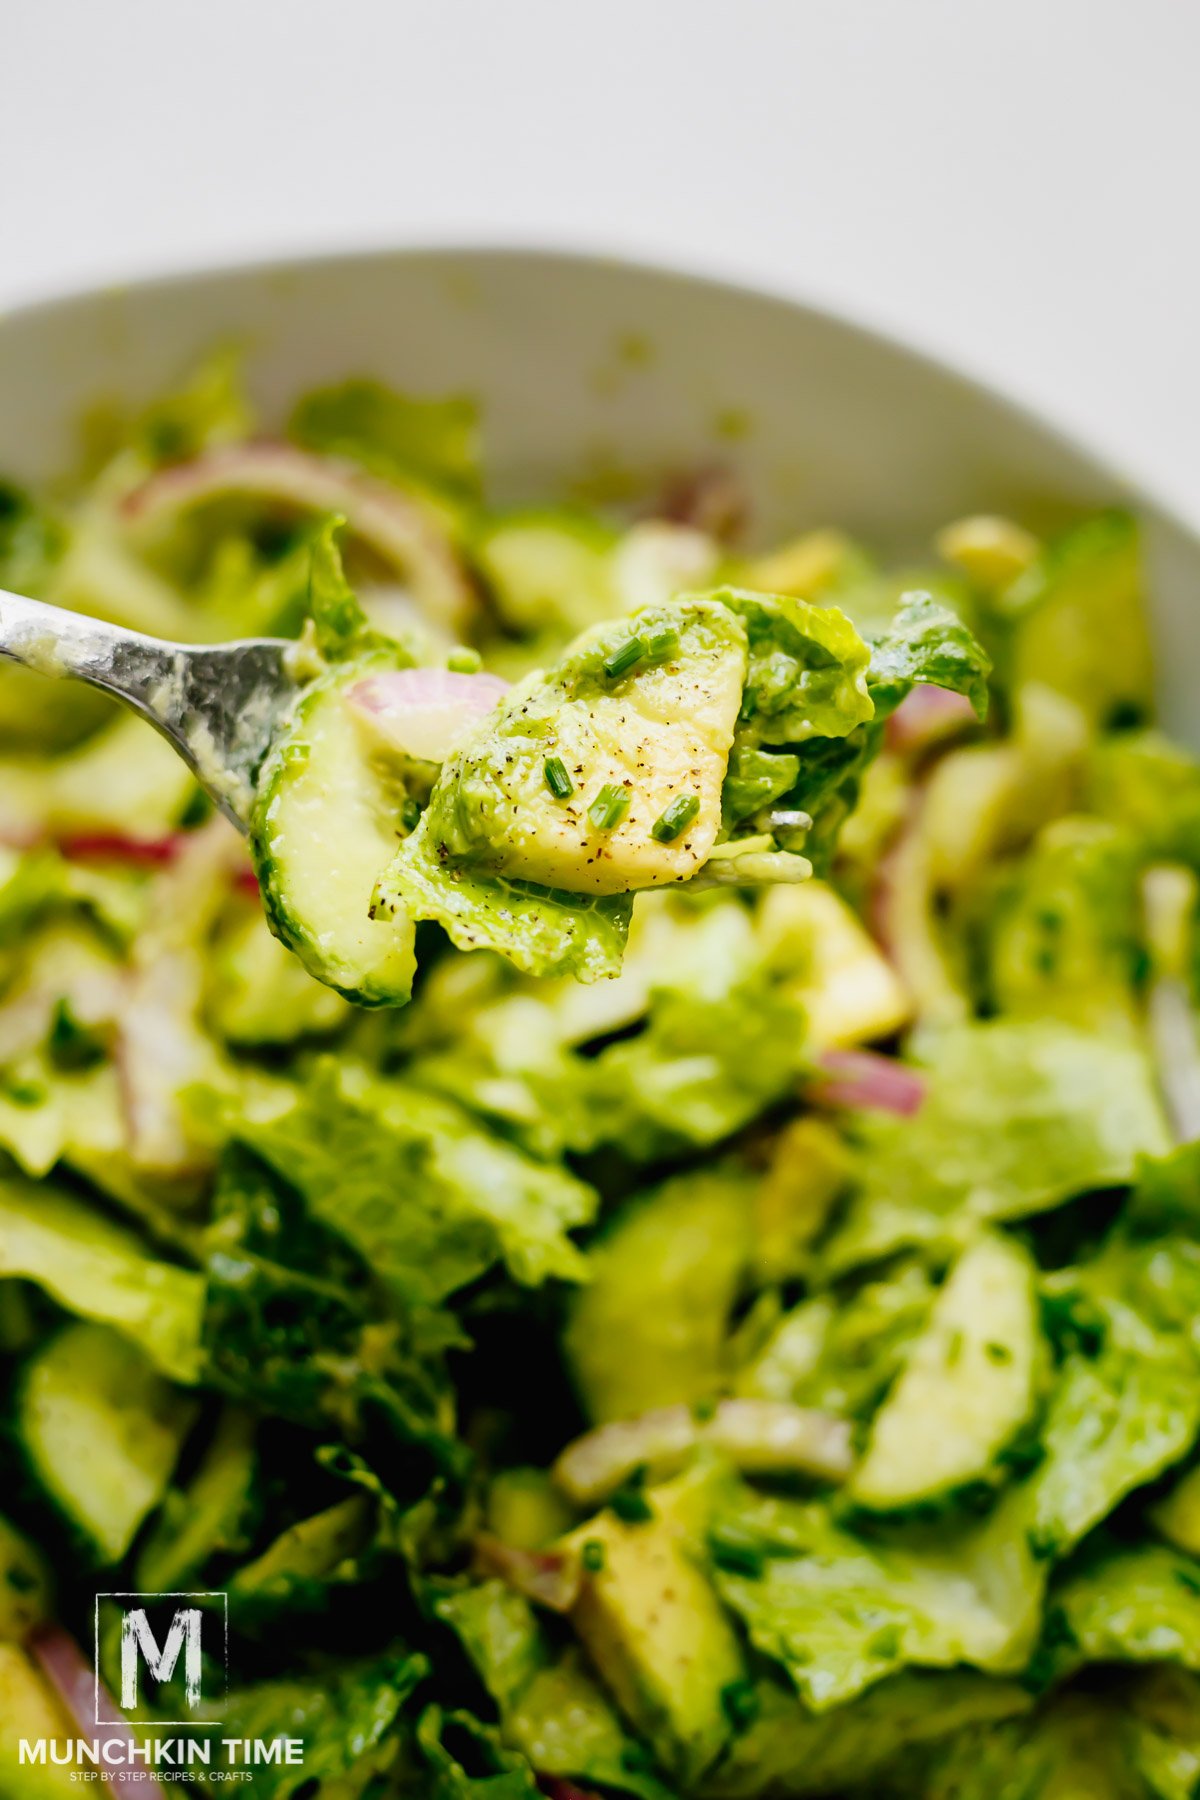 Super Easy Cucumber Avocado Salad with the most delicious Avocado Salad Dressing from scratch.